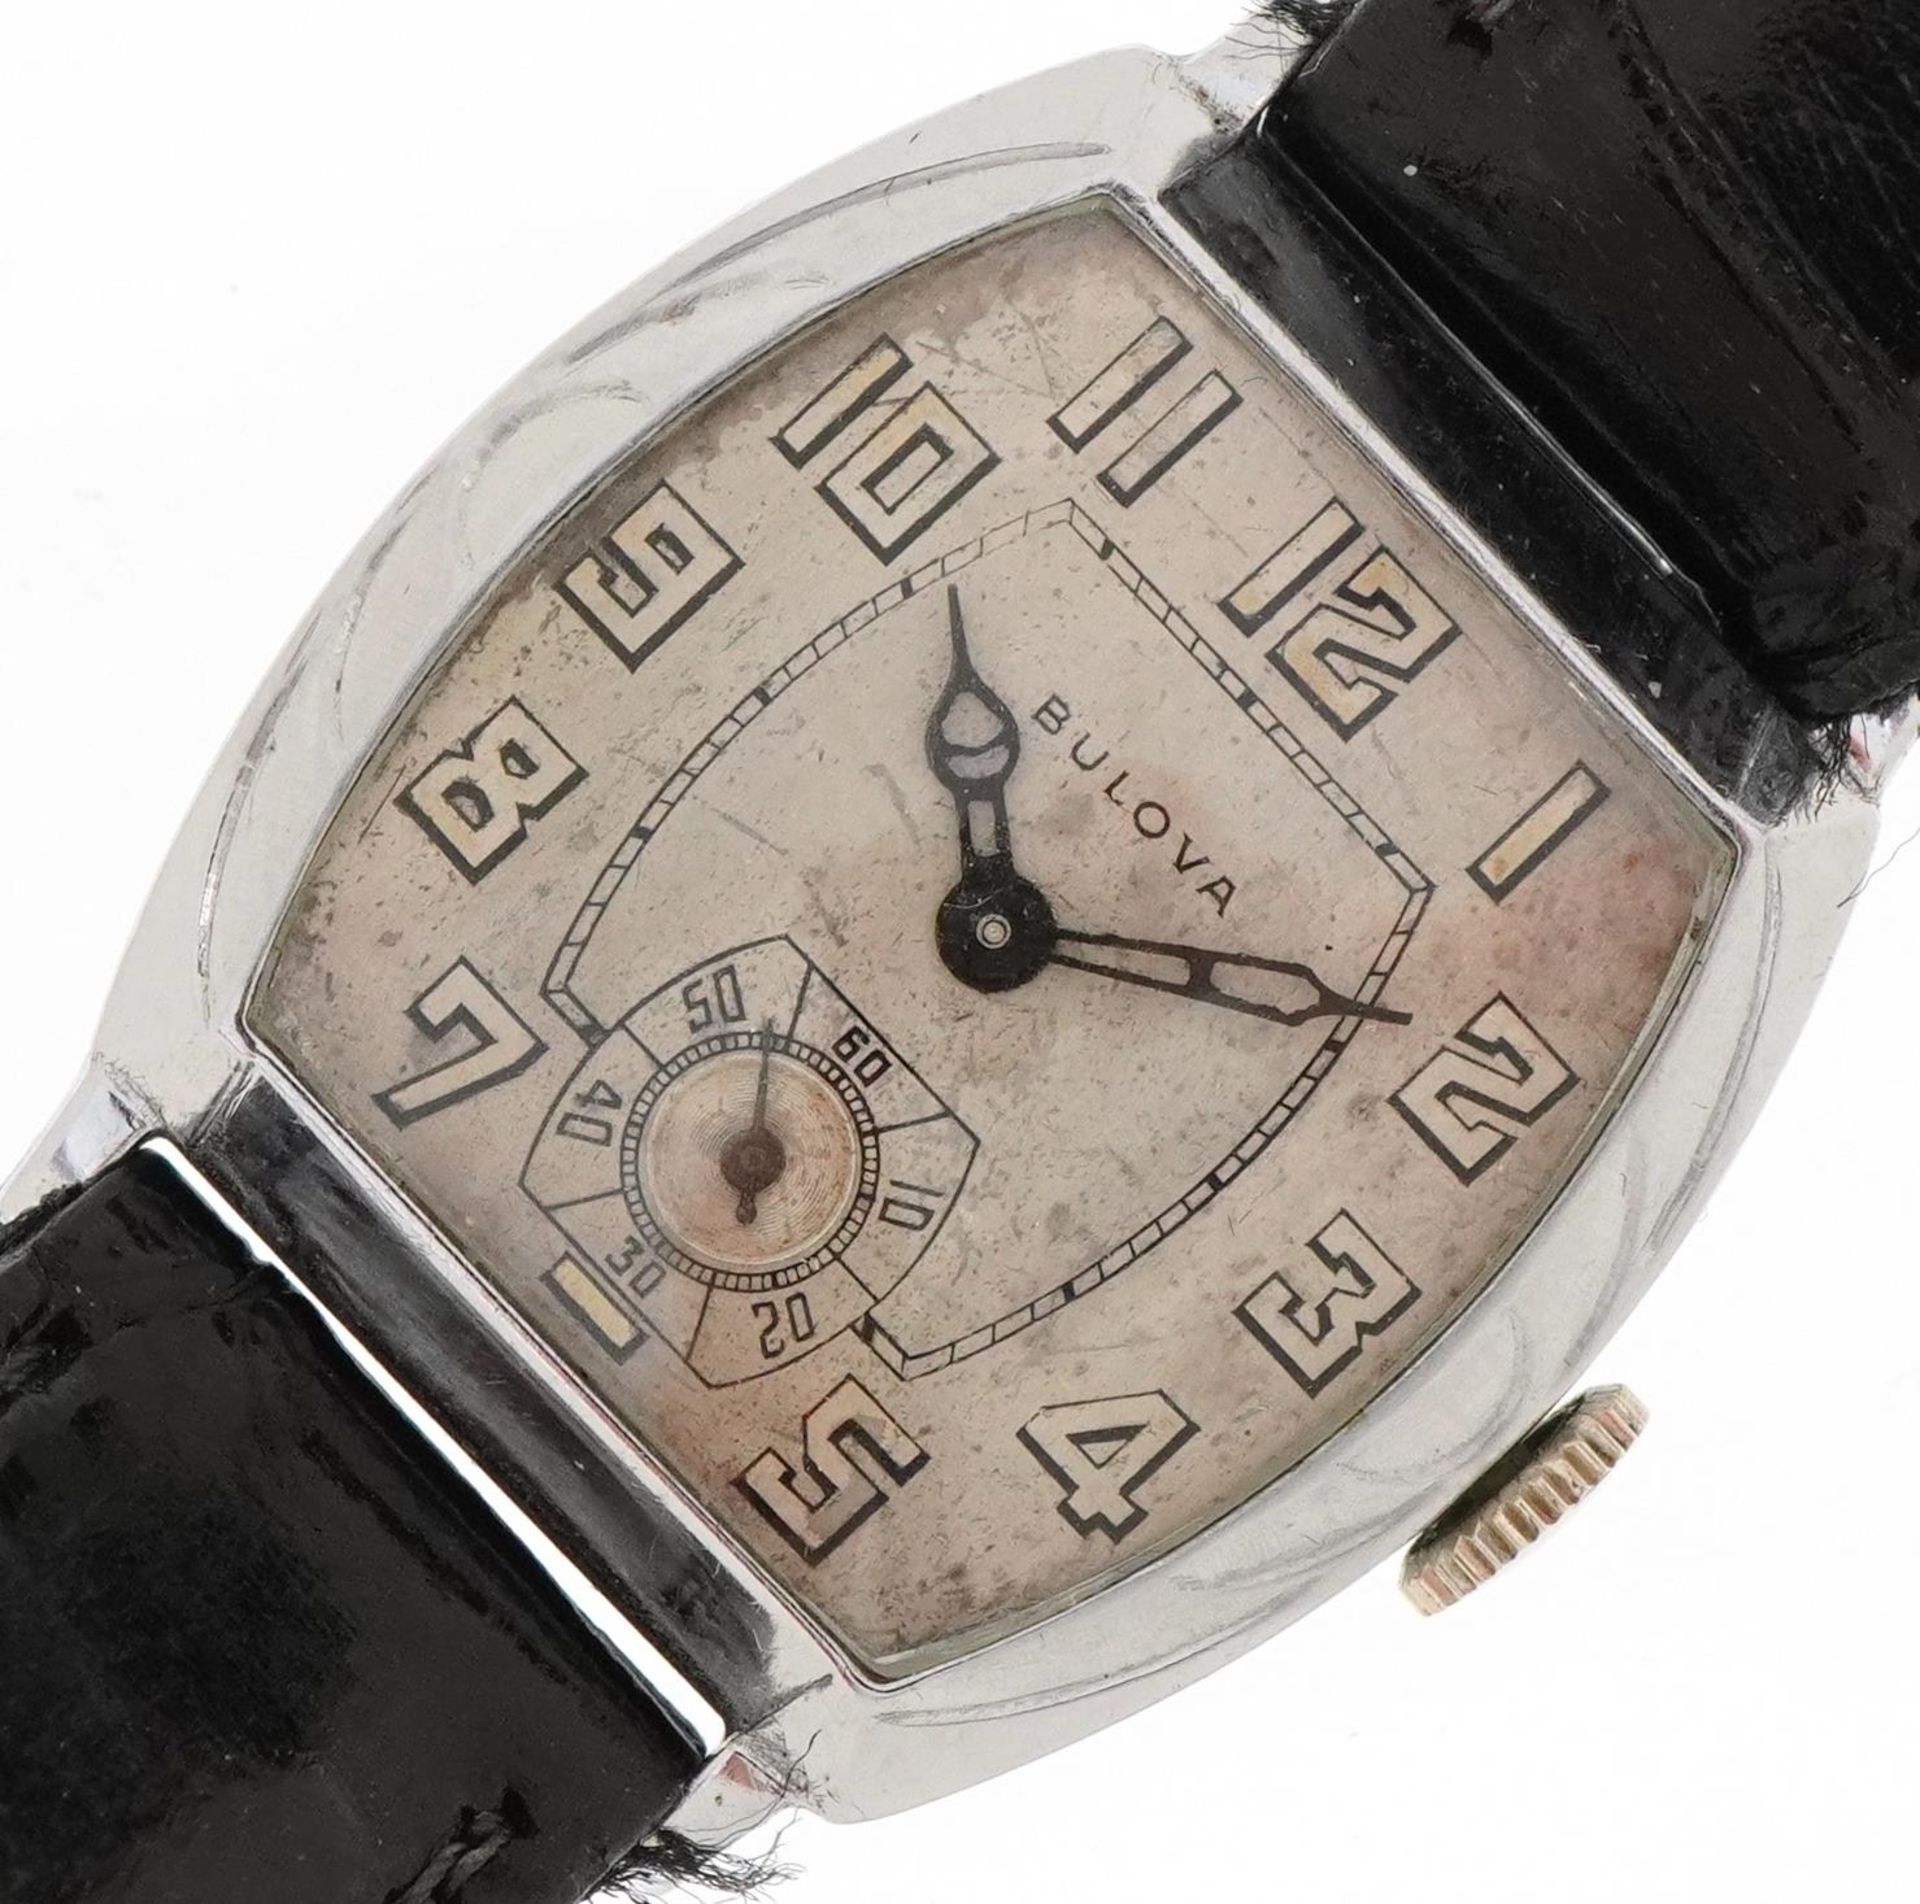 Bulova, Art Deco gentlemen's manual wind wristwatch having silvered and subsidiary dials with Arabic